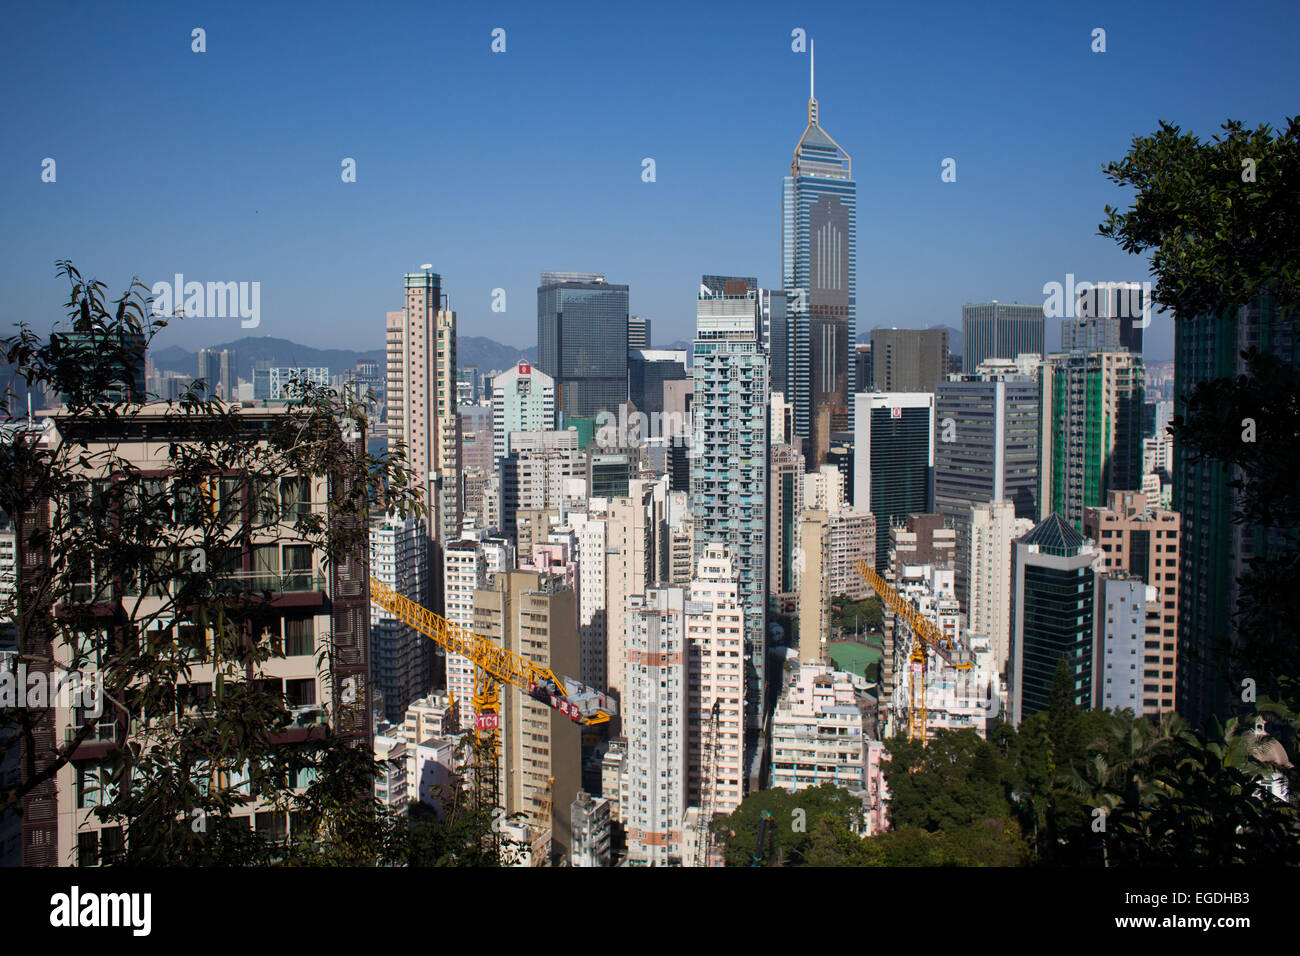 The view of Hong Kong and tall tower blocks seen from above Happy Valley. Stock Photo